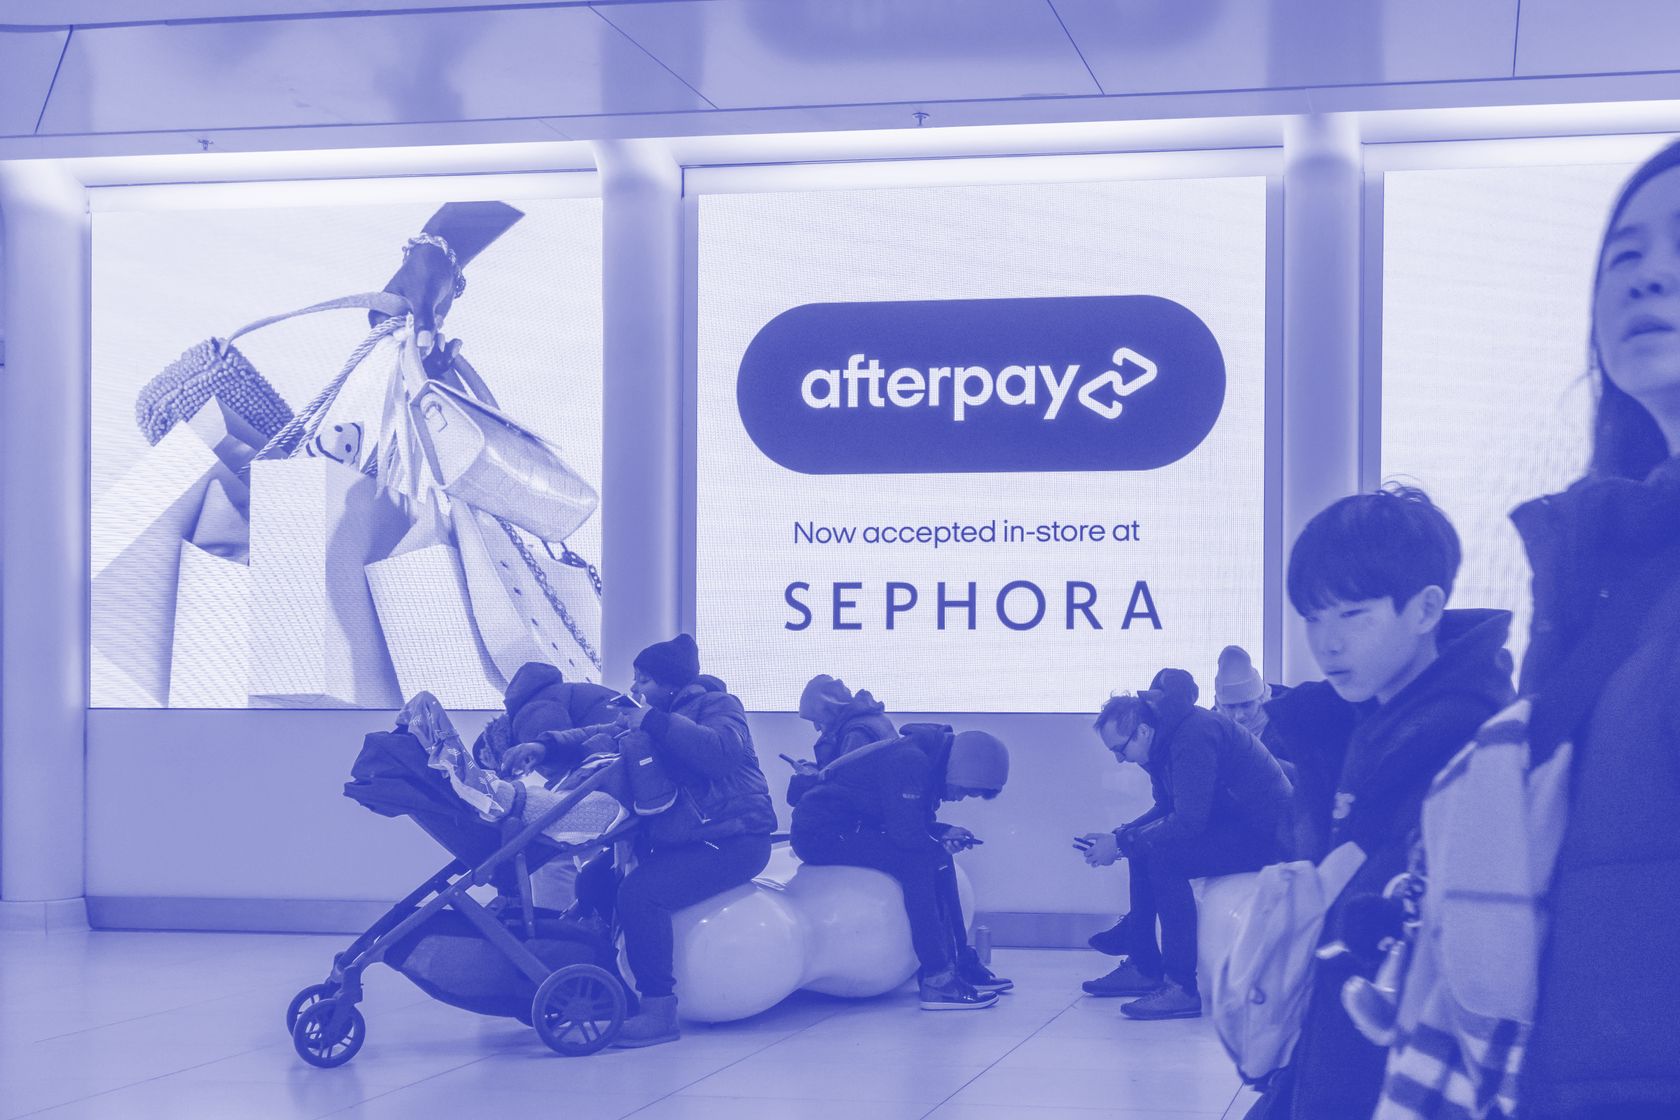 Nick Molnar signals Block will axe Afterpay brand in the US by year-end —  Capital Brief